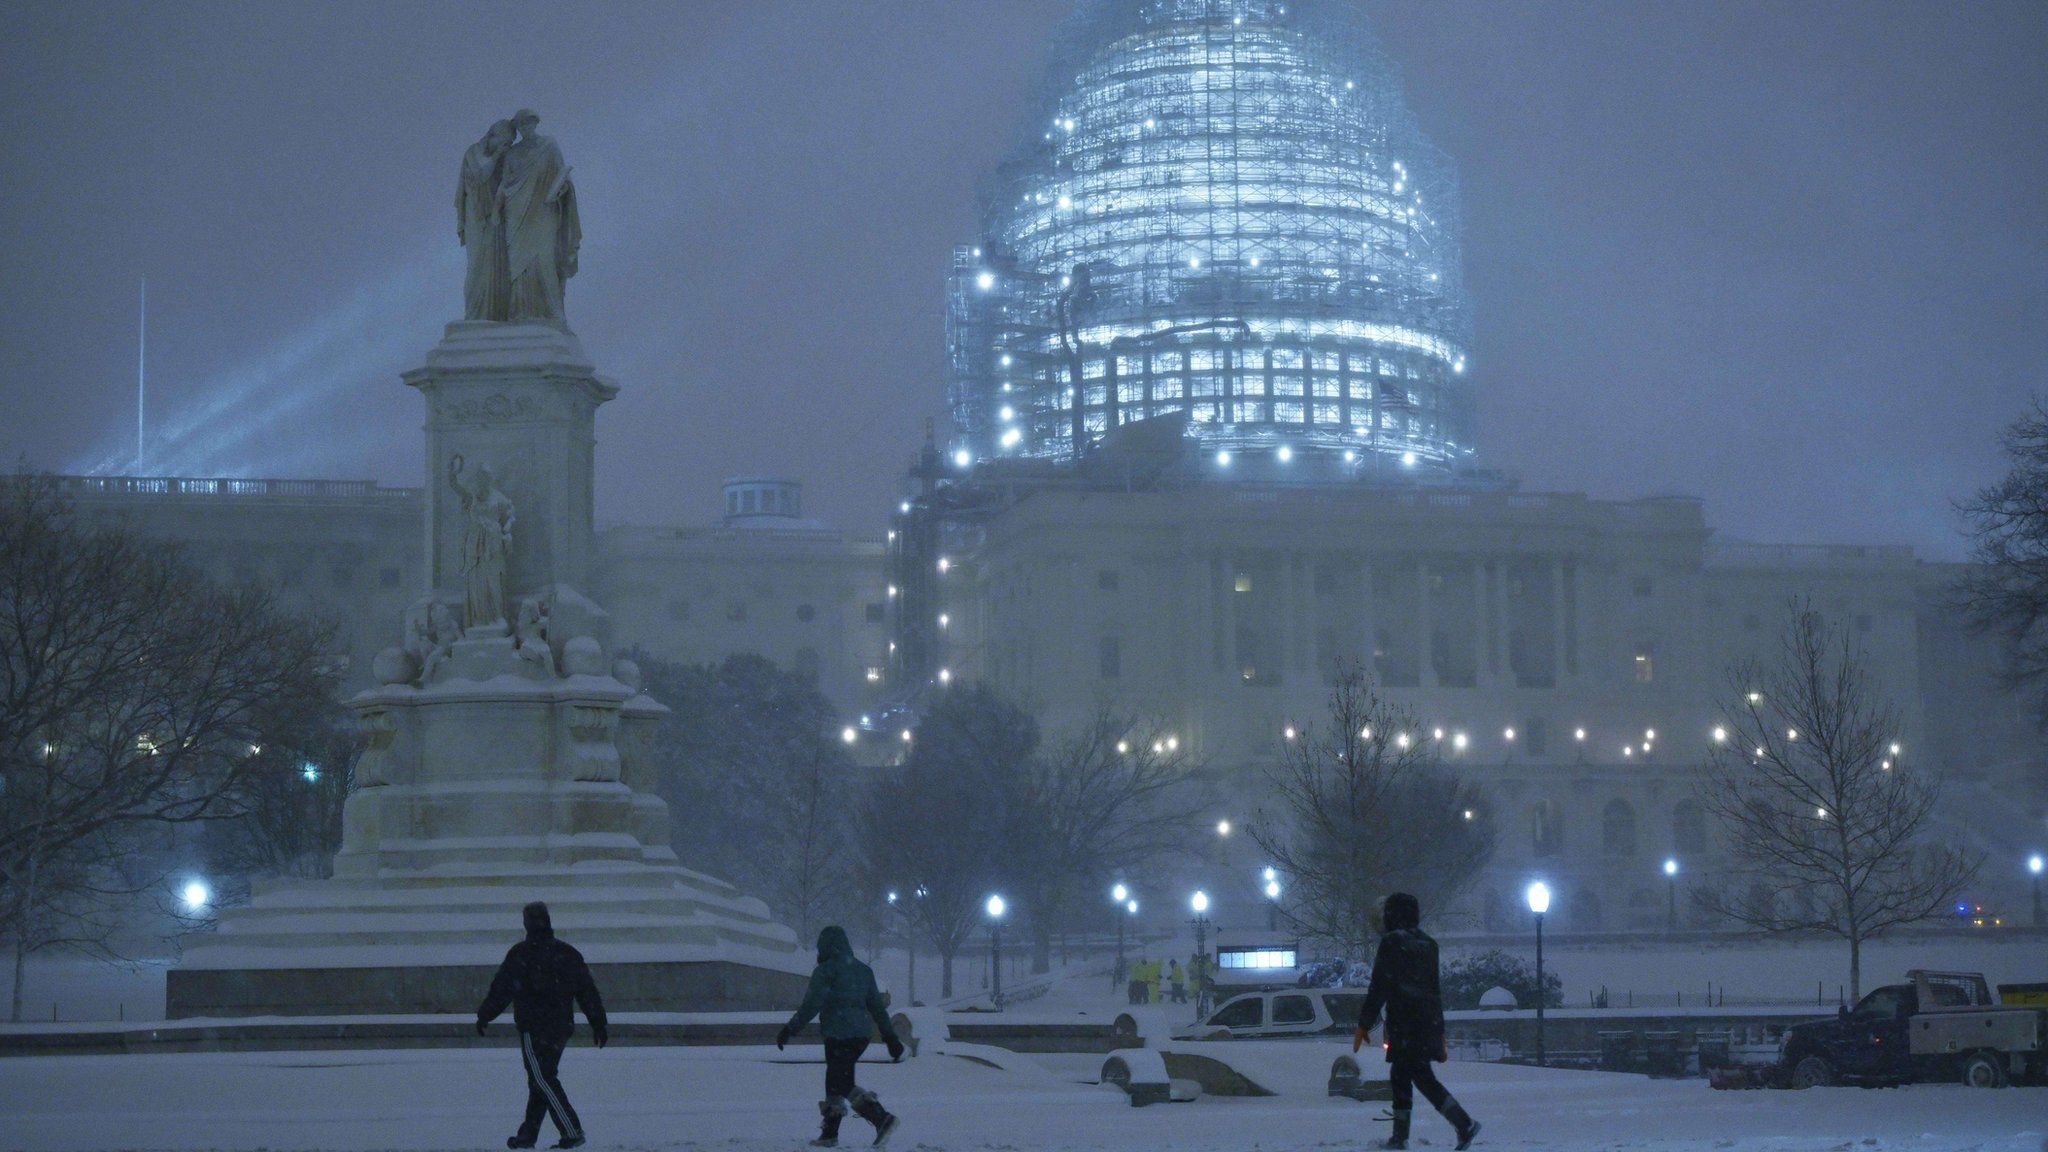 Pedestrians outside the US Capitol in the snow, Washington DC (23 January)